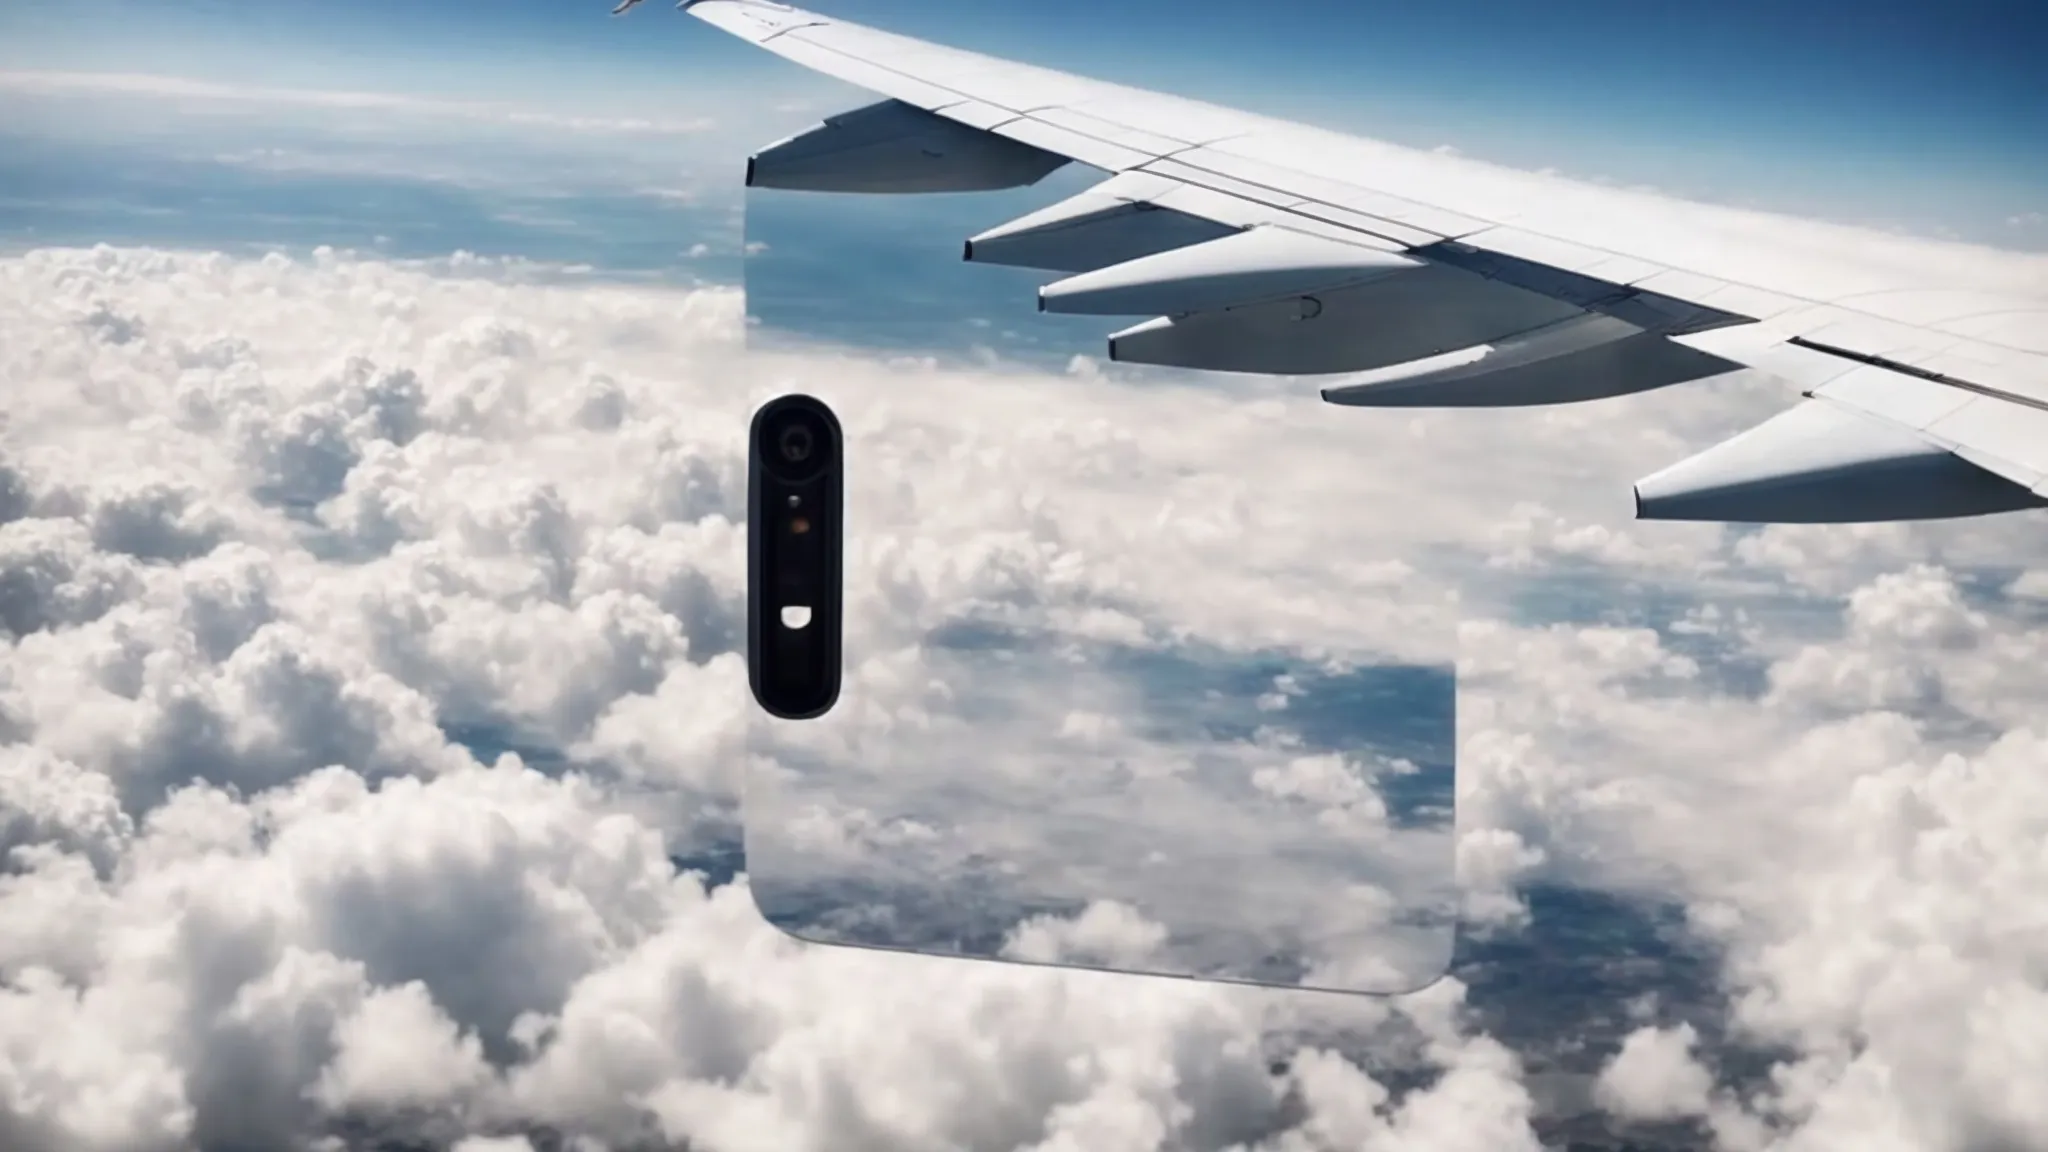 a serene view through an airplane window with a phone in airplane mode resting on the seat tray, overlooking a blanket of clouds under a bright sky.